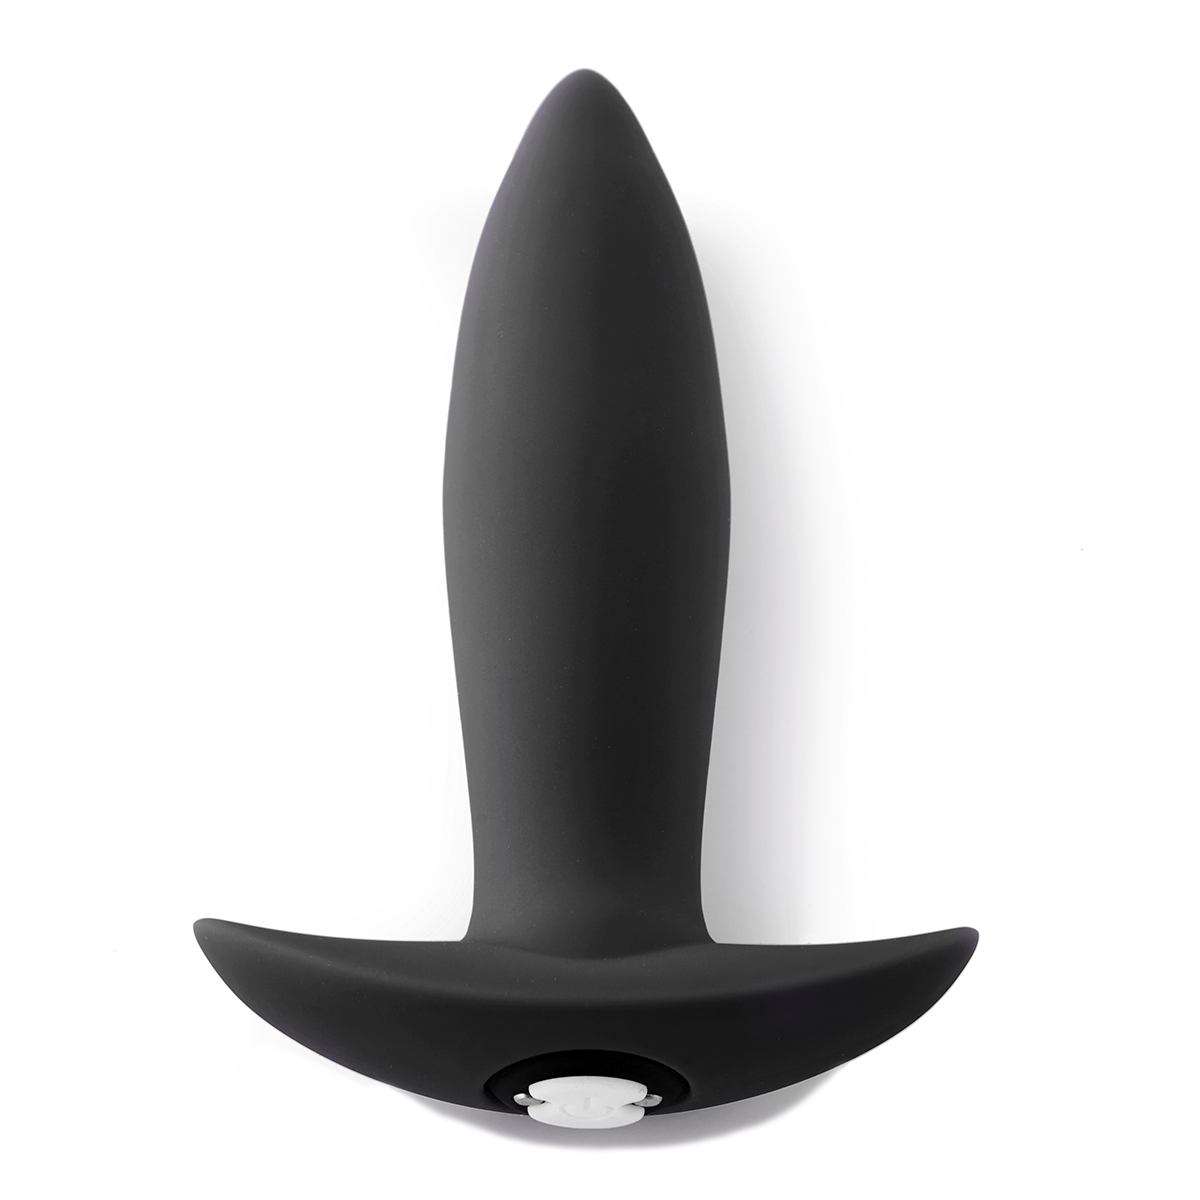 A smooth, vibrating butt plug that&rsquo;s easy to use and comfortable to wear. A good choice for beginners, and definitely an all-around stop favorite.